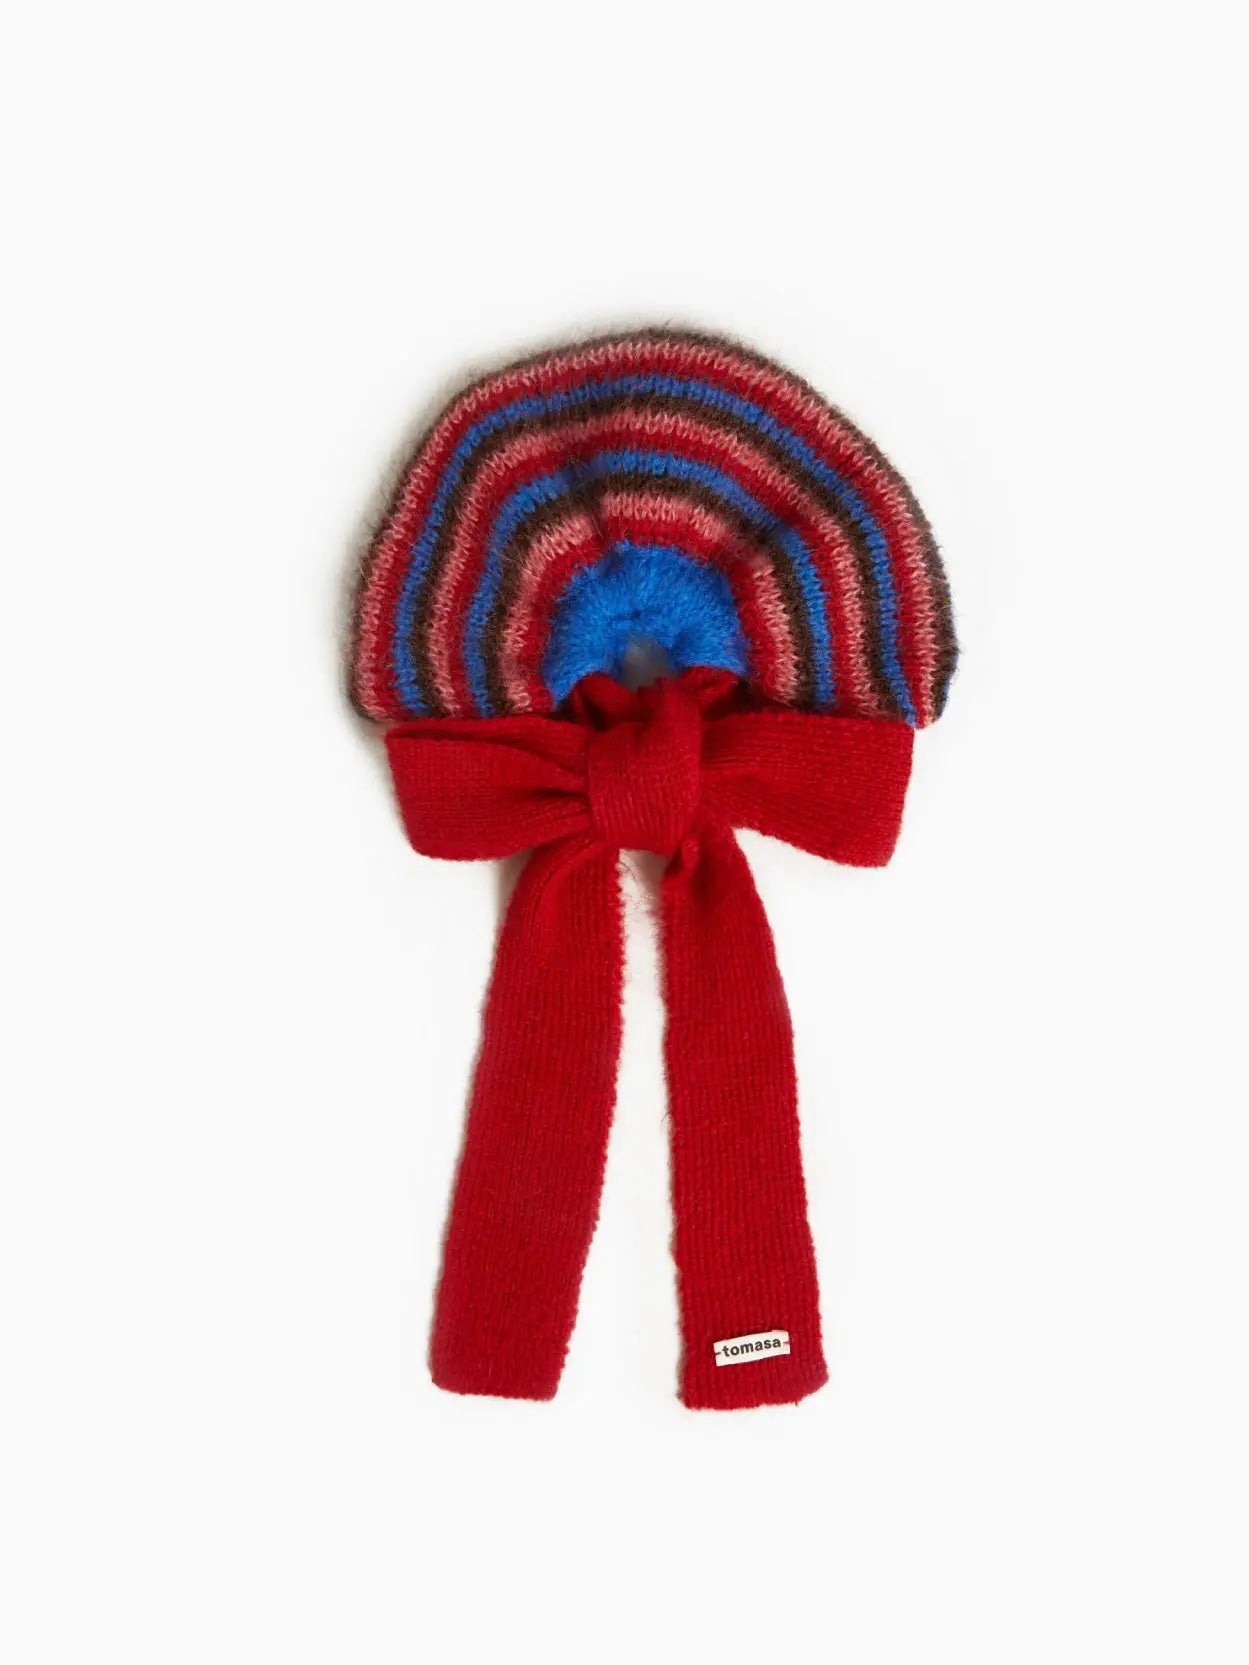 A colorful striped Mencia Bow Scrunchie with a knitted red bow at the base and a red fringe. The stripes include shades of red, blue, and brown, forming a circular pattern. A small white label with the word "Tomasa" is attached at the bottom of the bow. Find it exclusively at Bassalstore in Barcelona.